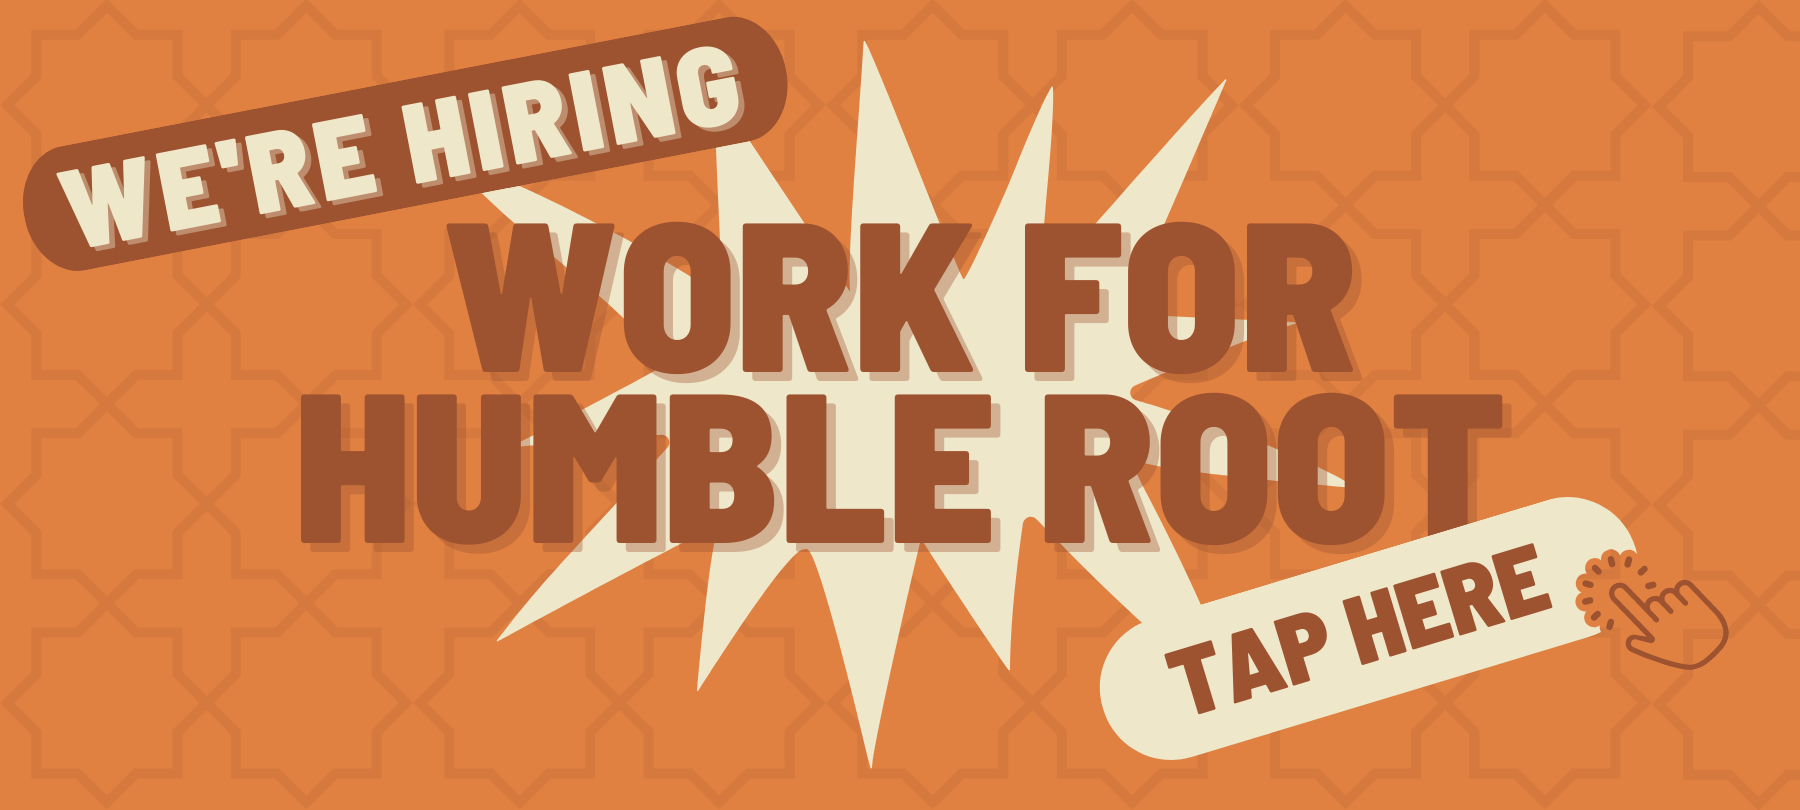 Humble Root is now hiring for assistant manager!